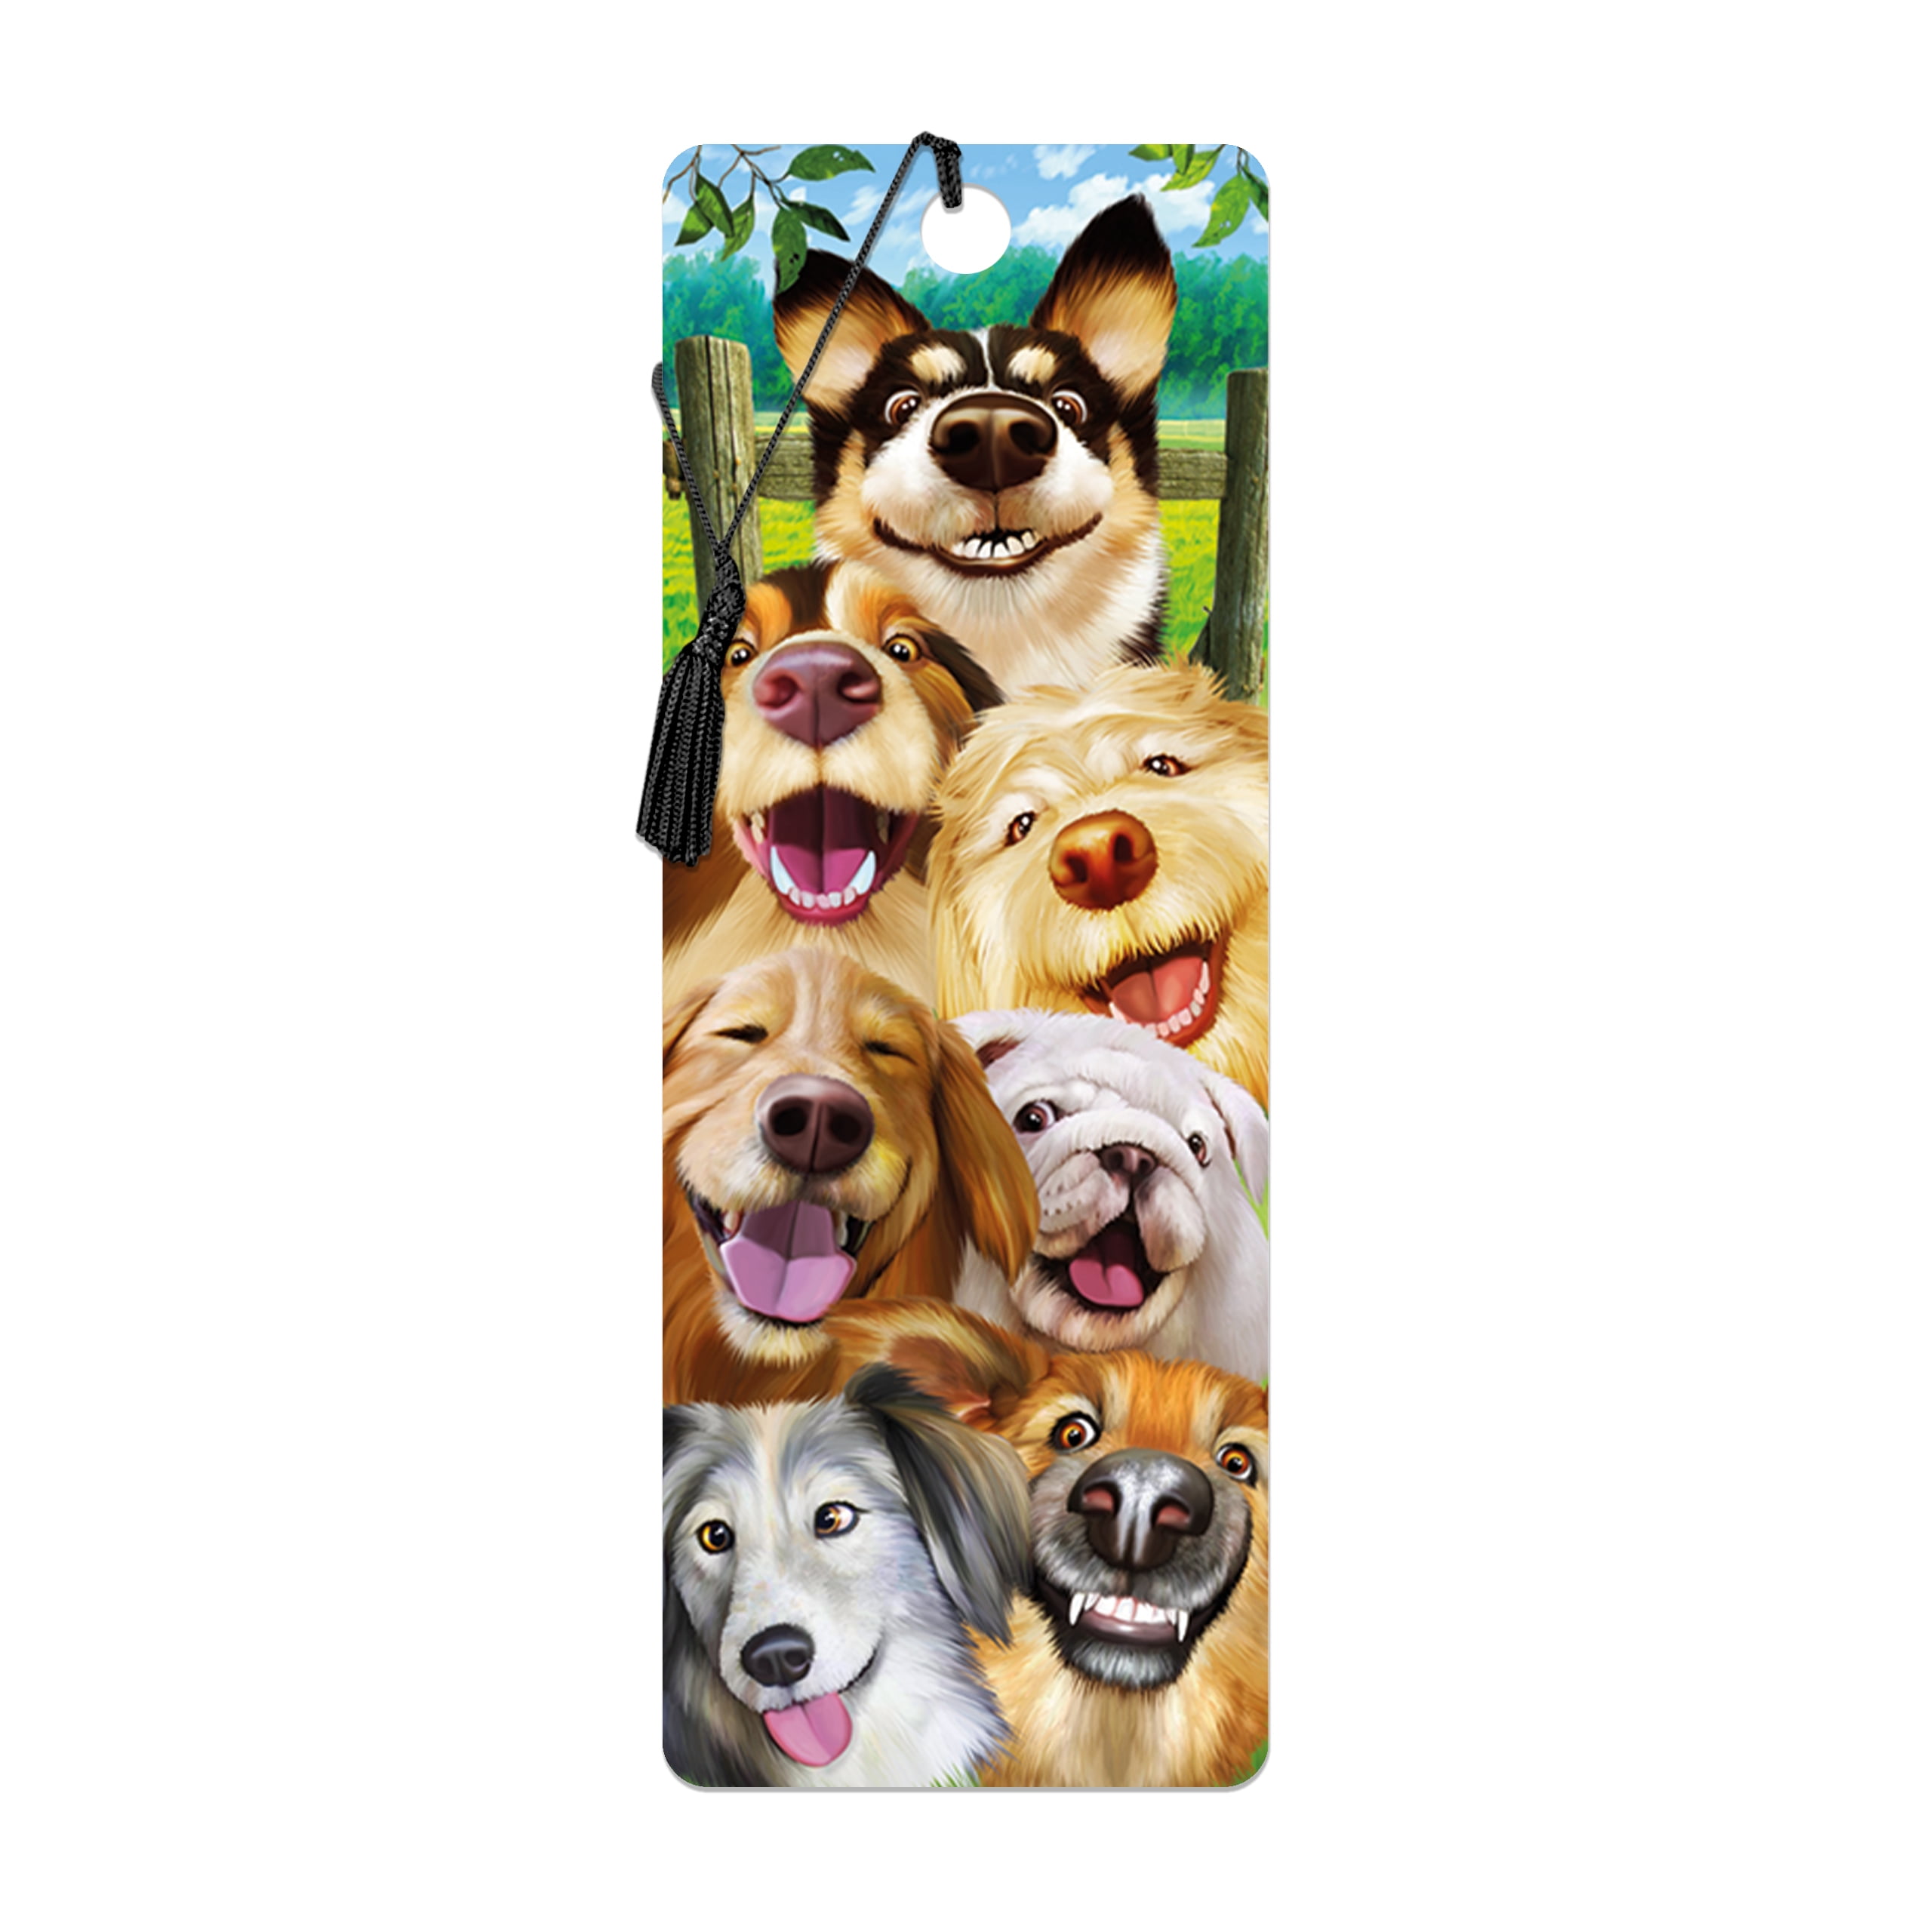 Canine Selfie from Deluxebase A Dog Bookmark with lenticular 3D Artwork Licensed from Renowned Artist Michael Searle 3D LiveLife Bookmark